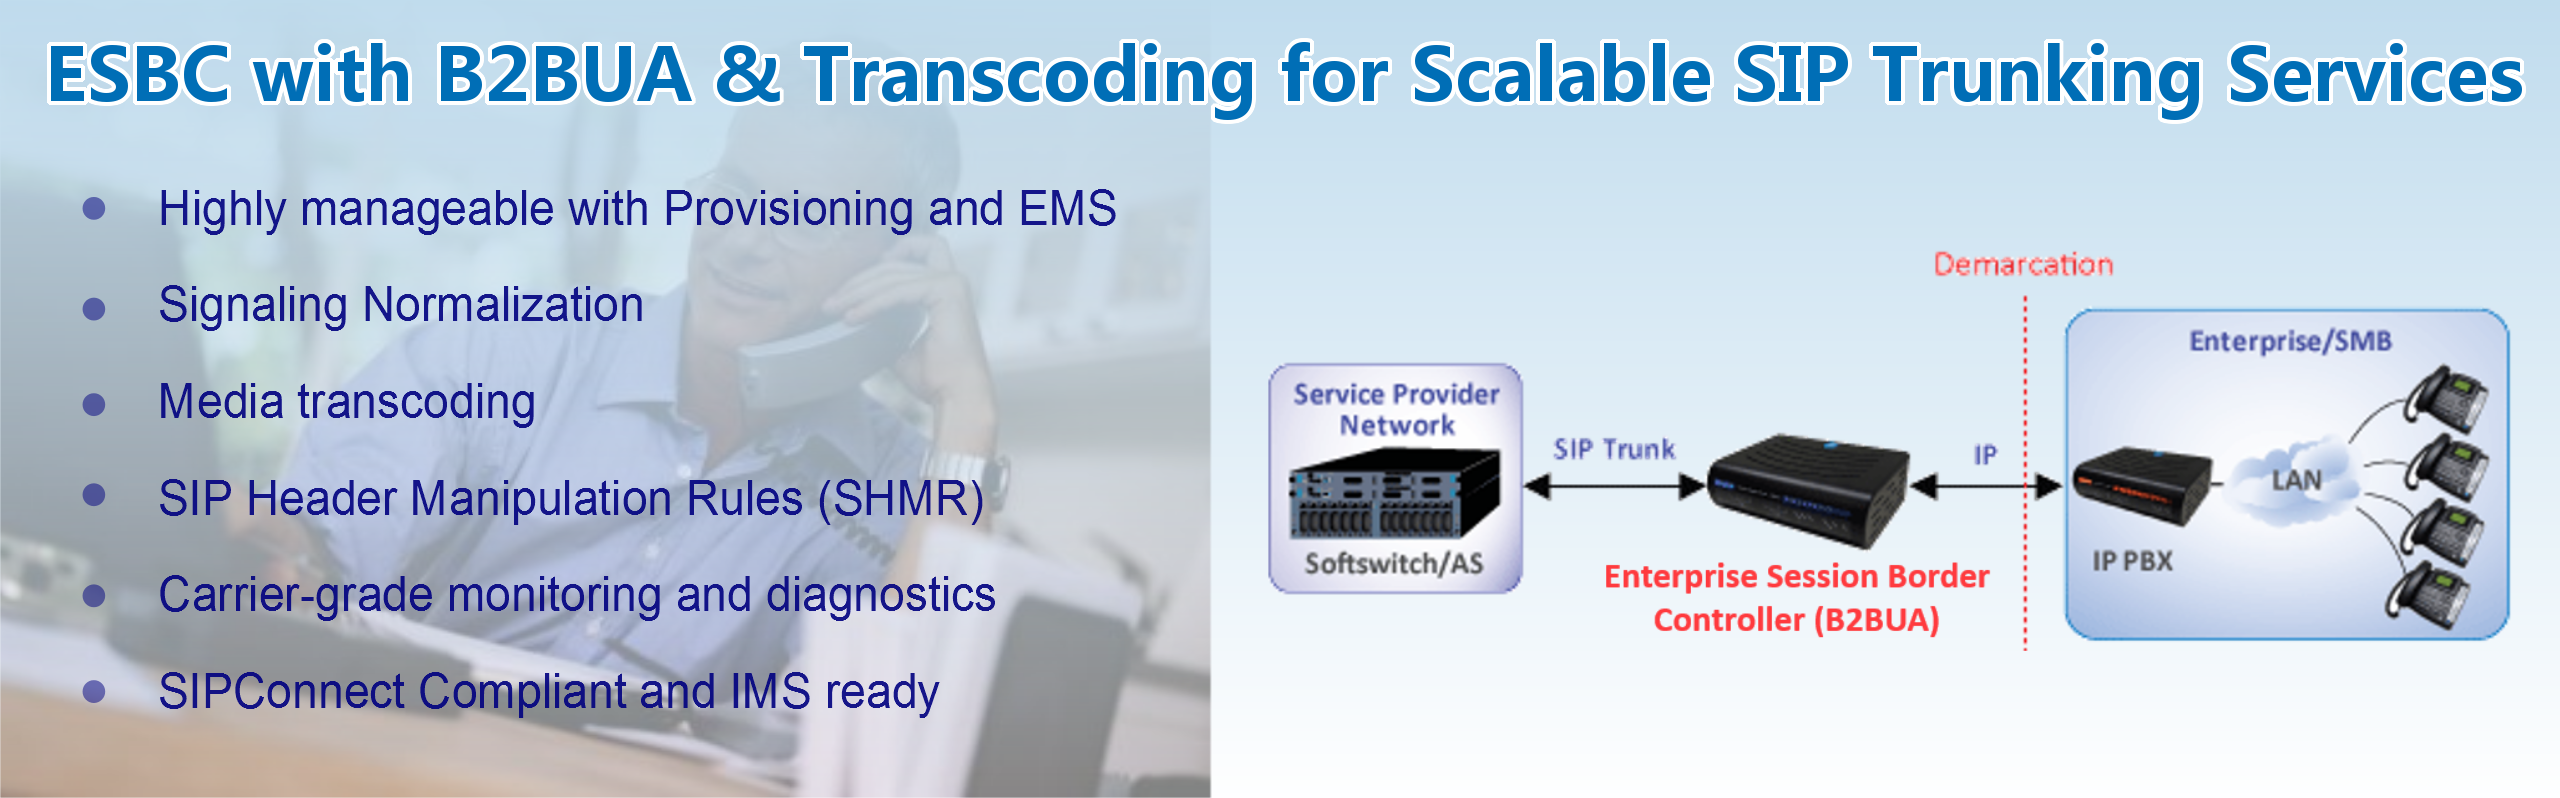 ESBC with B2BUA & Transcoding for Scalable SIP Trunking Services